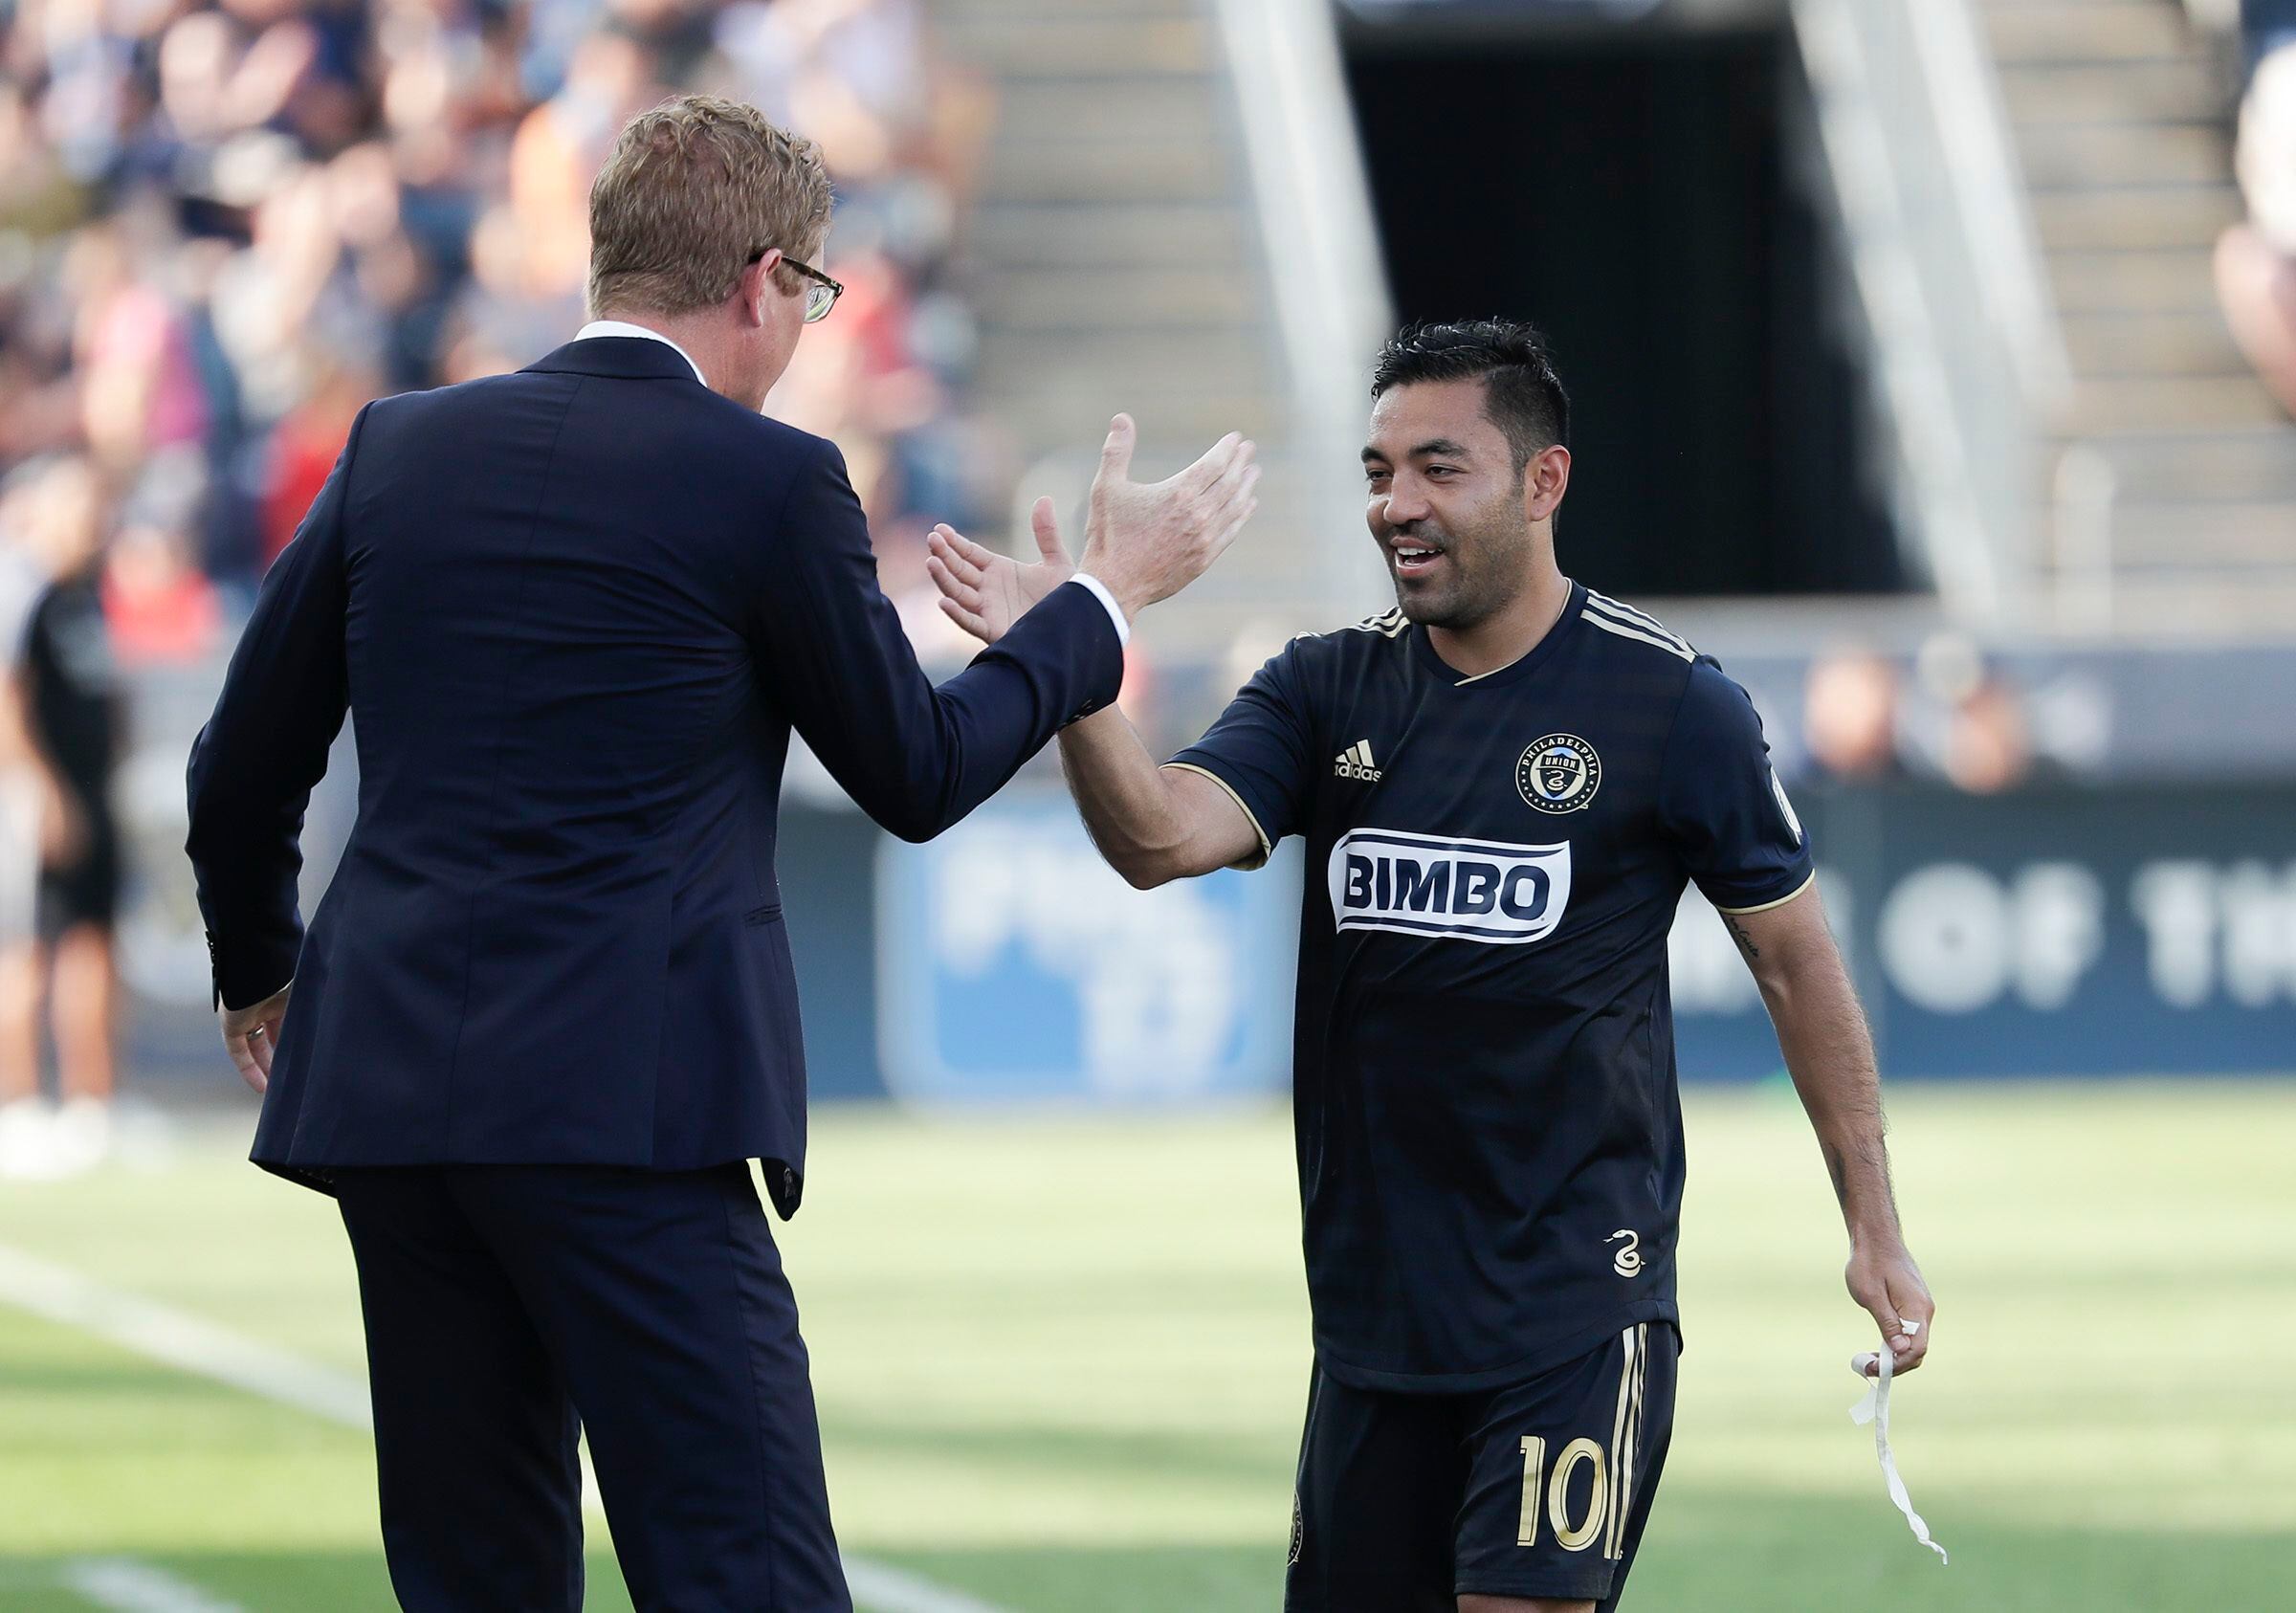 Marco Fabián's goal gives Union 4-3 win over New York Red Bulls